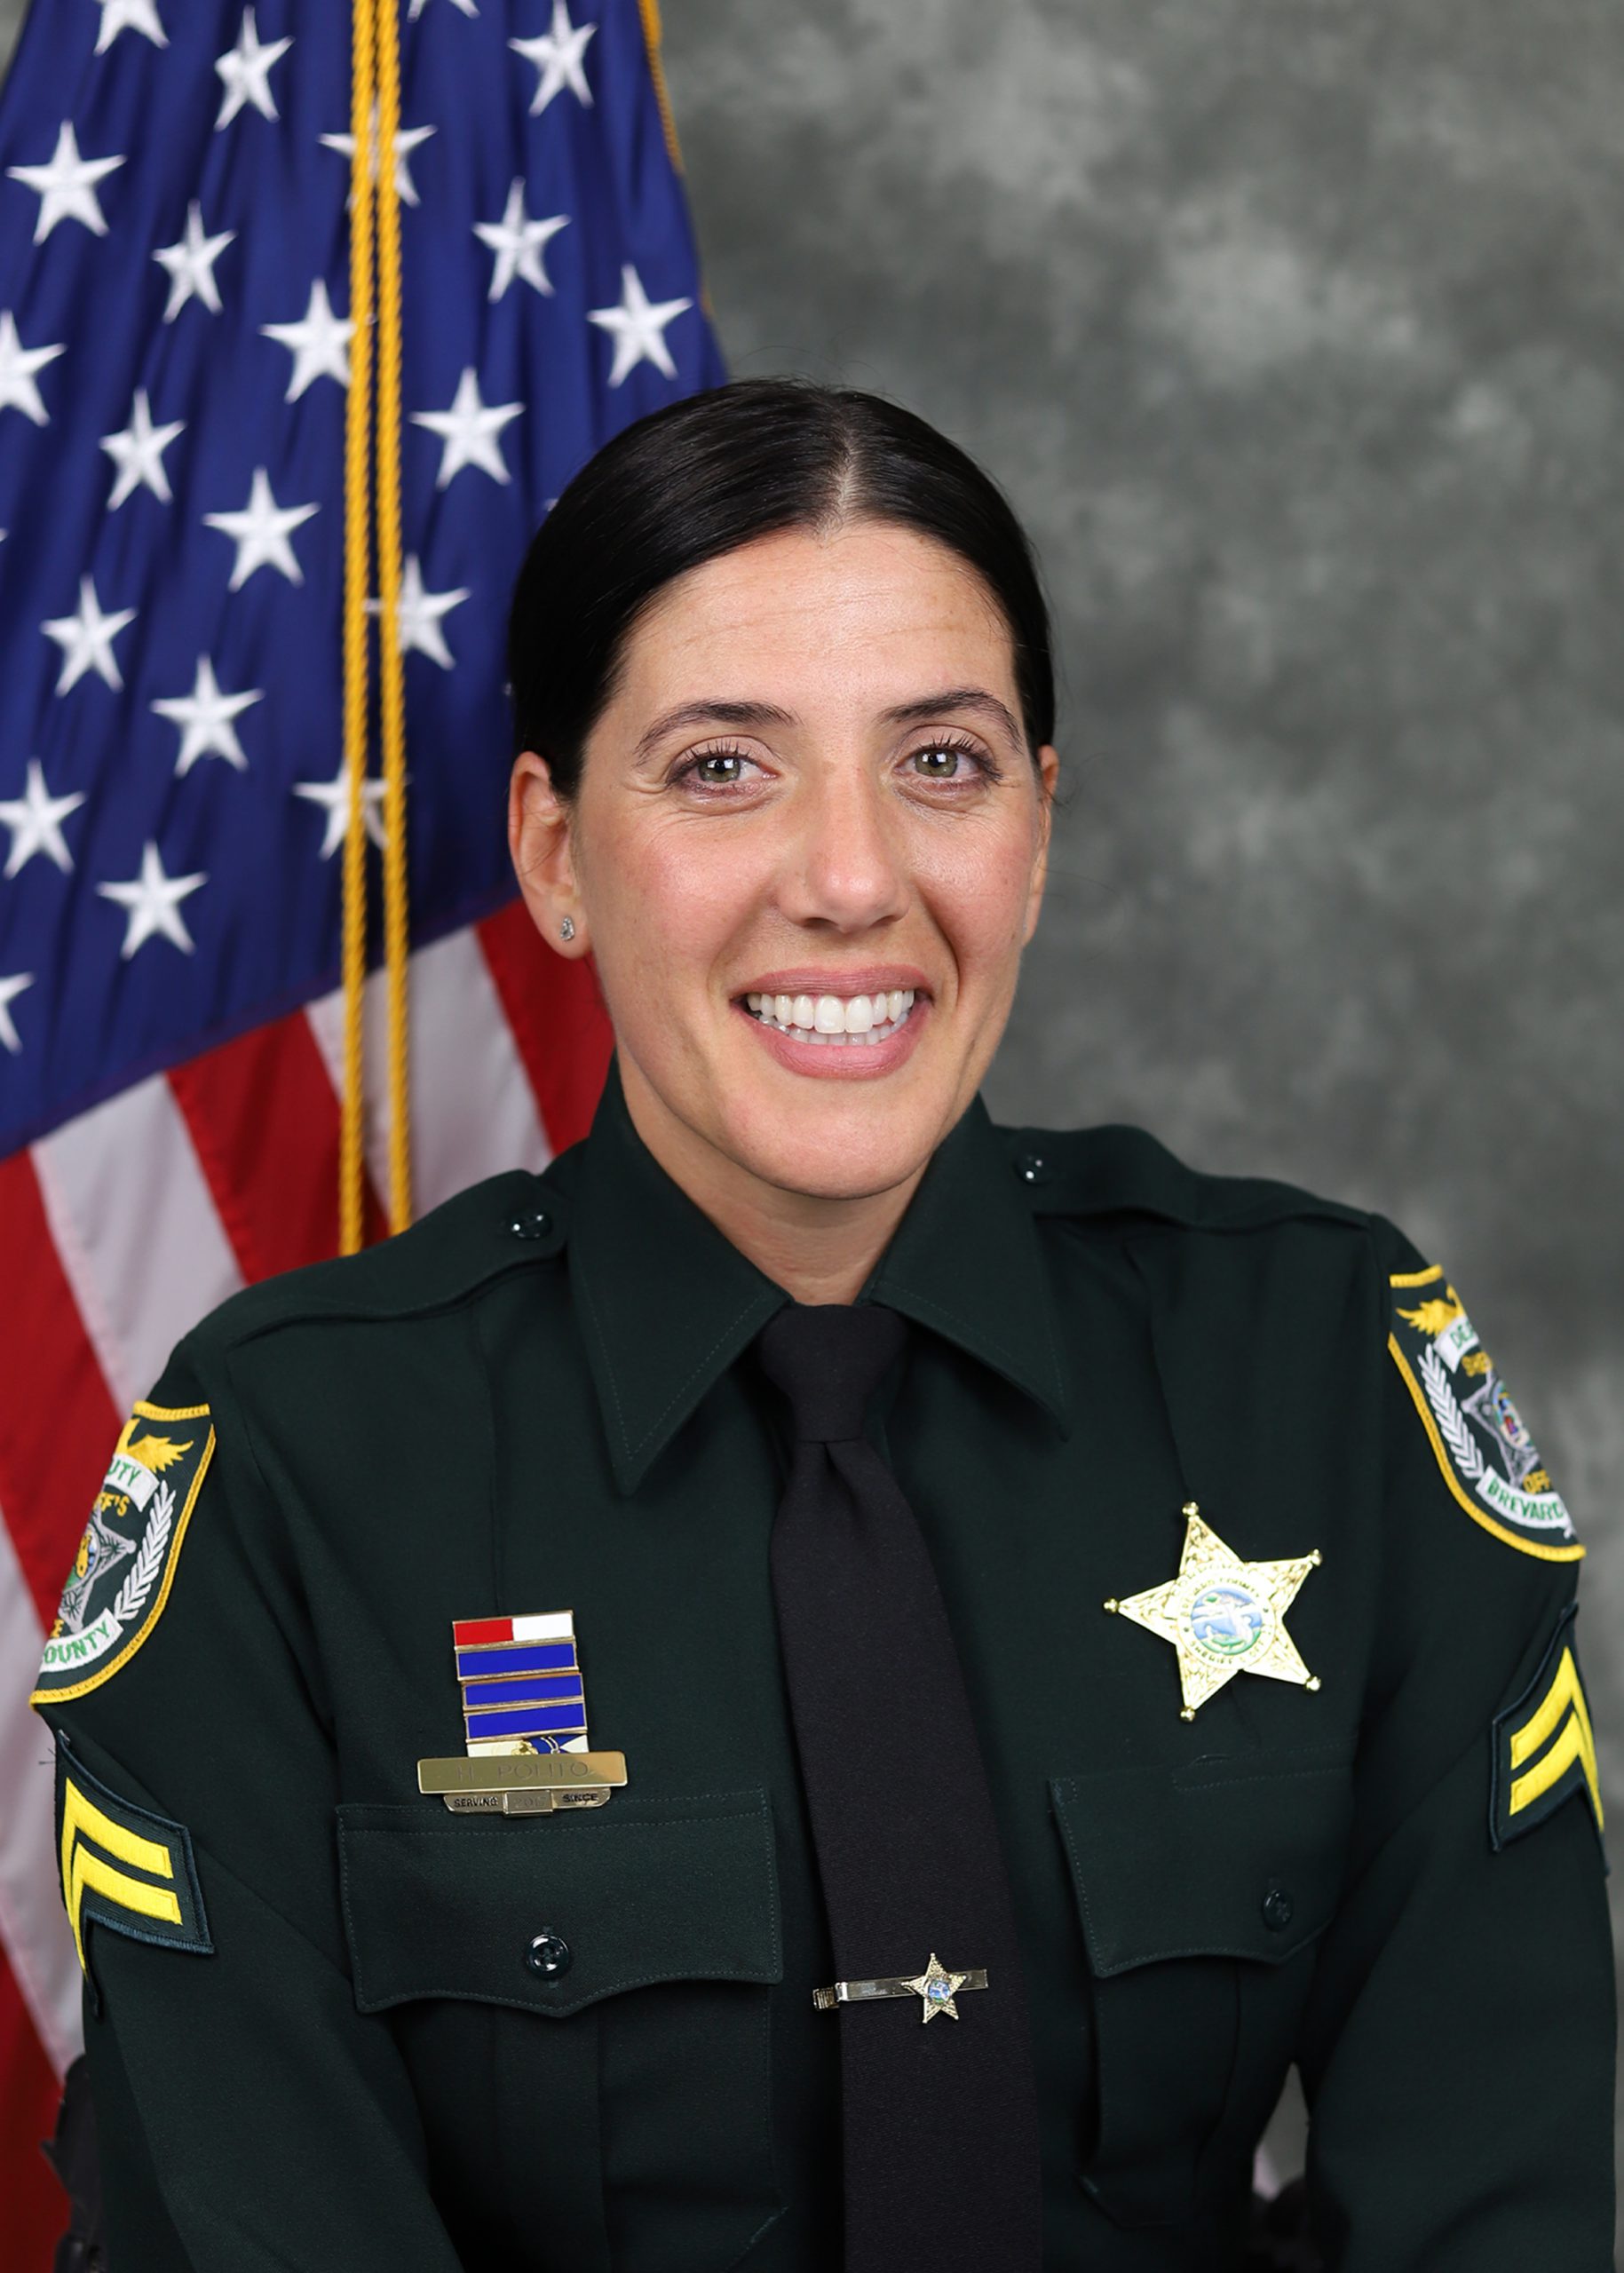 Nr 23 16 Brevard County Sheriff S Office Announces Award Winners Brevard County Sheriff S Office